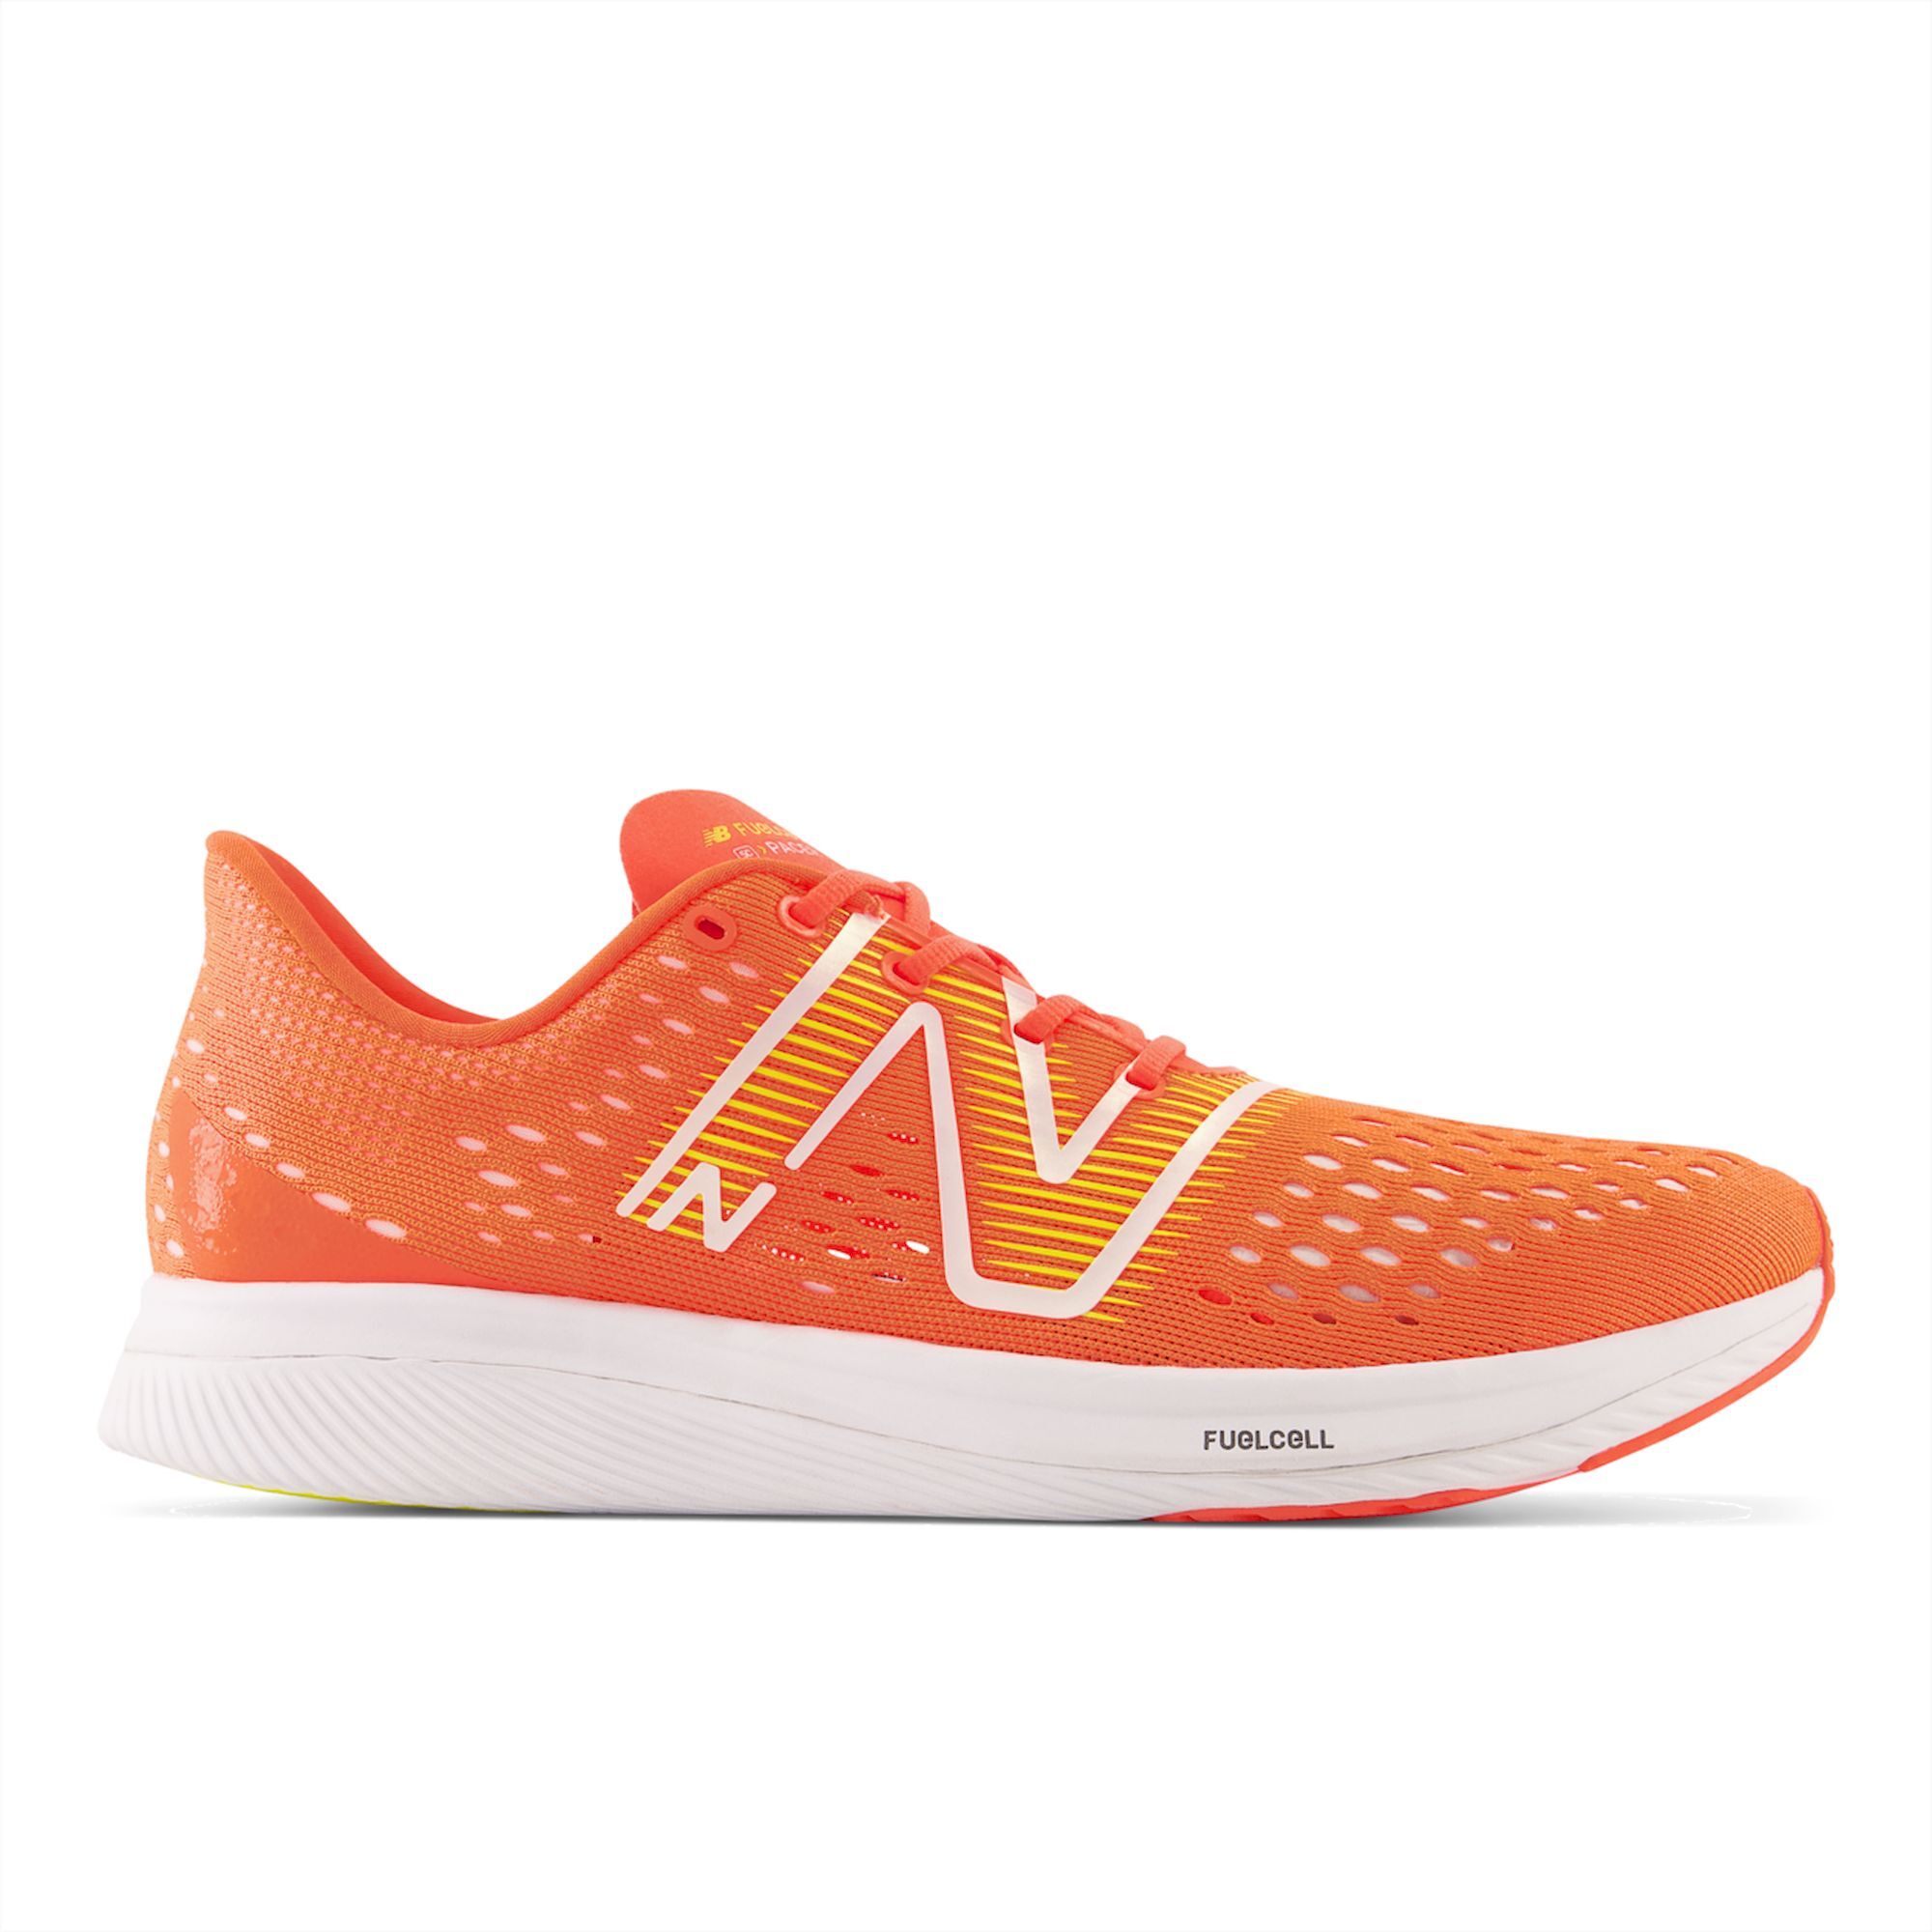 New Balance Fuelcell Supercomp Pacer - Running shoes - Men's